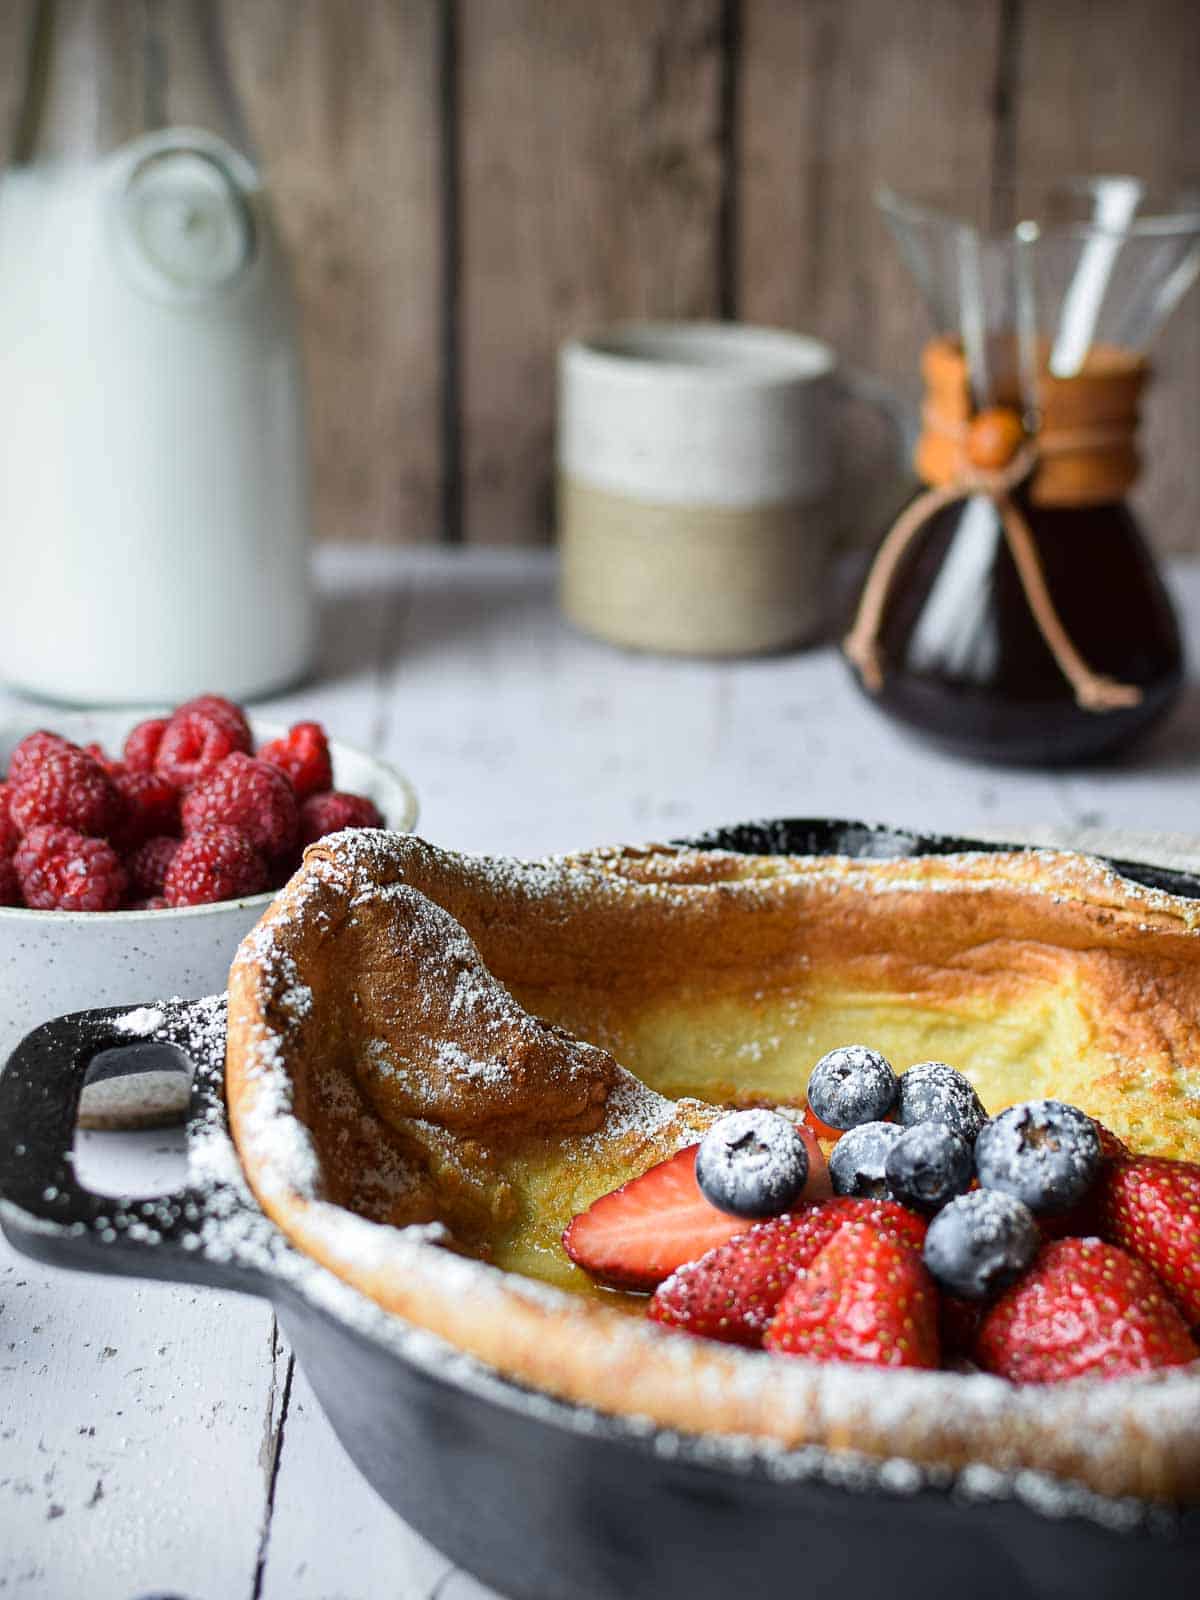 Eye-level view of a Dutch baby in a cast iron skillet with fruit and coffee in the background.